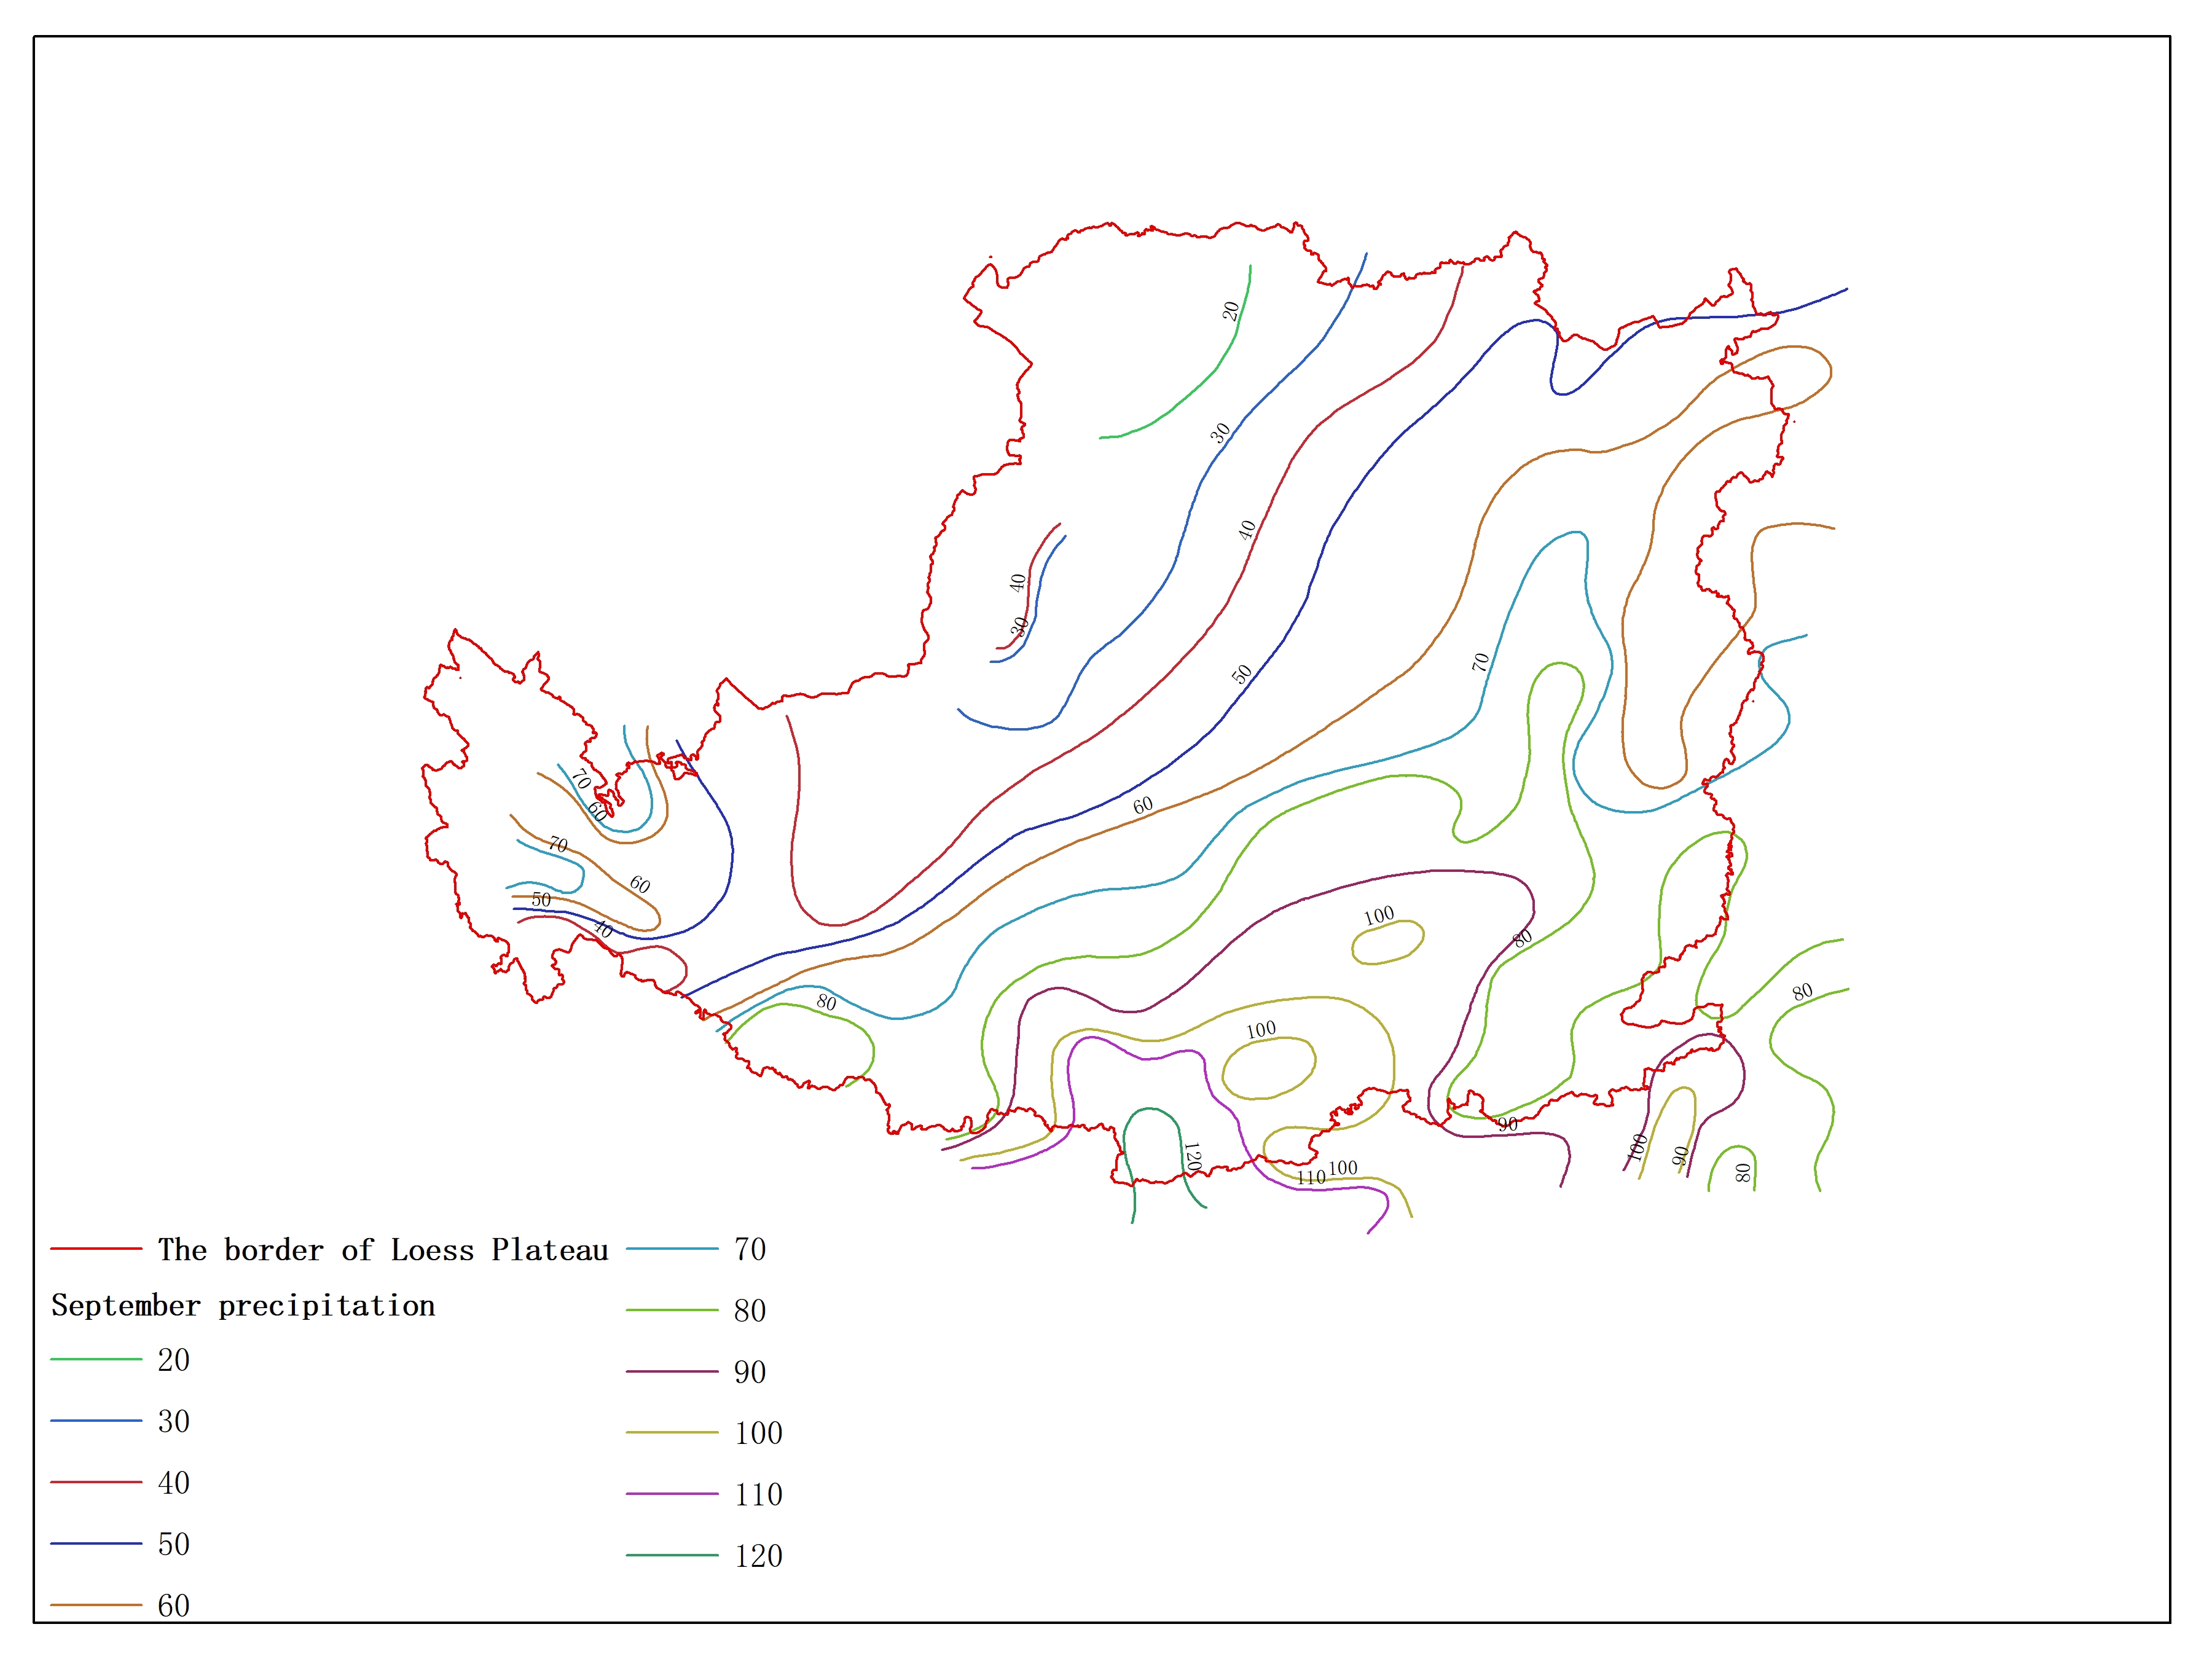 Agricultural climate resource atlas of Loess Plateau-September precipitation